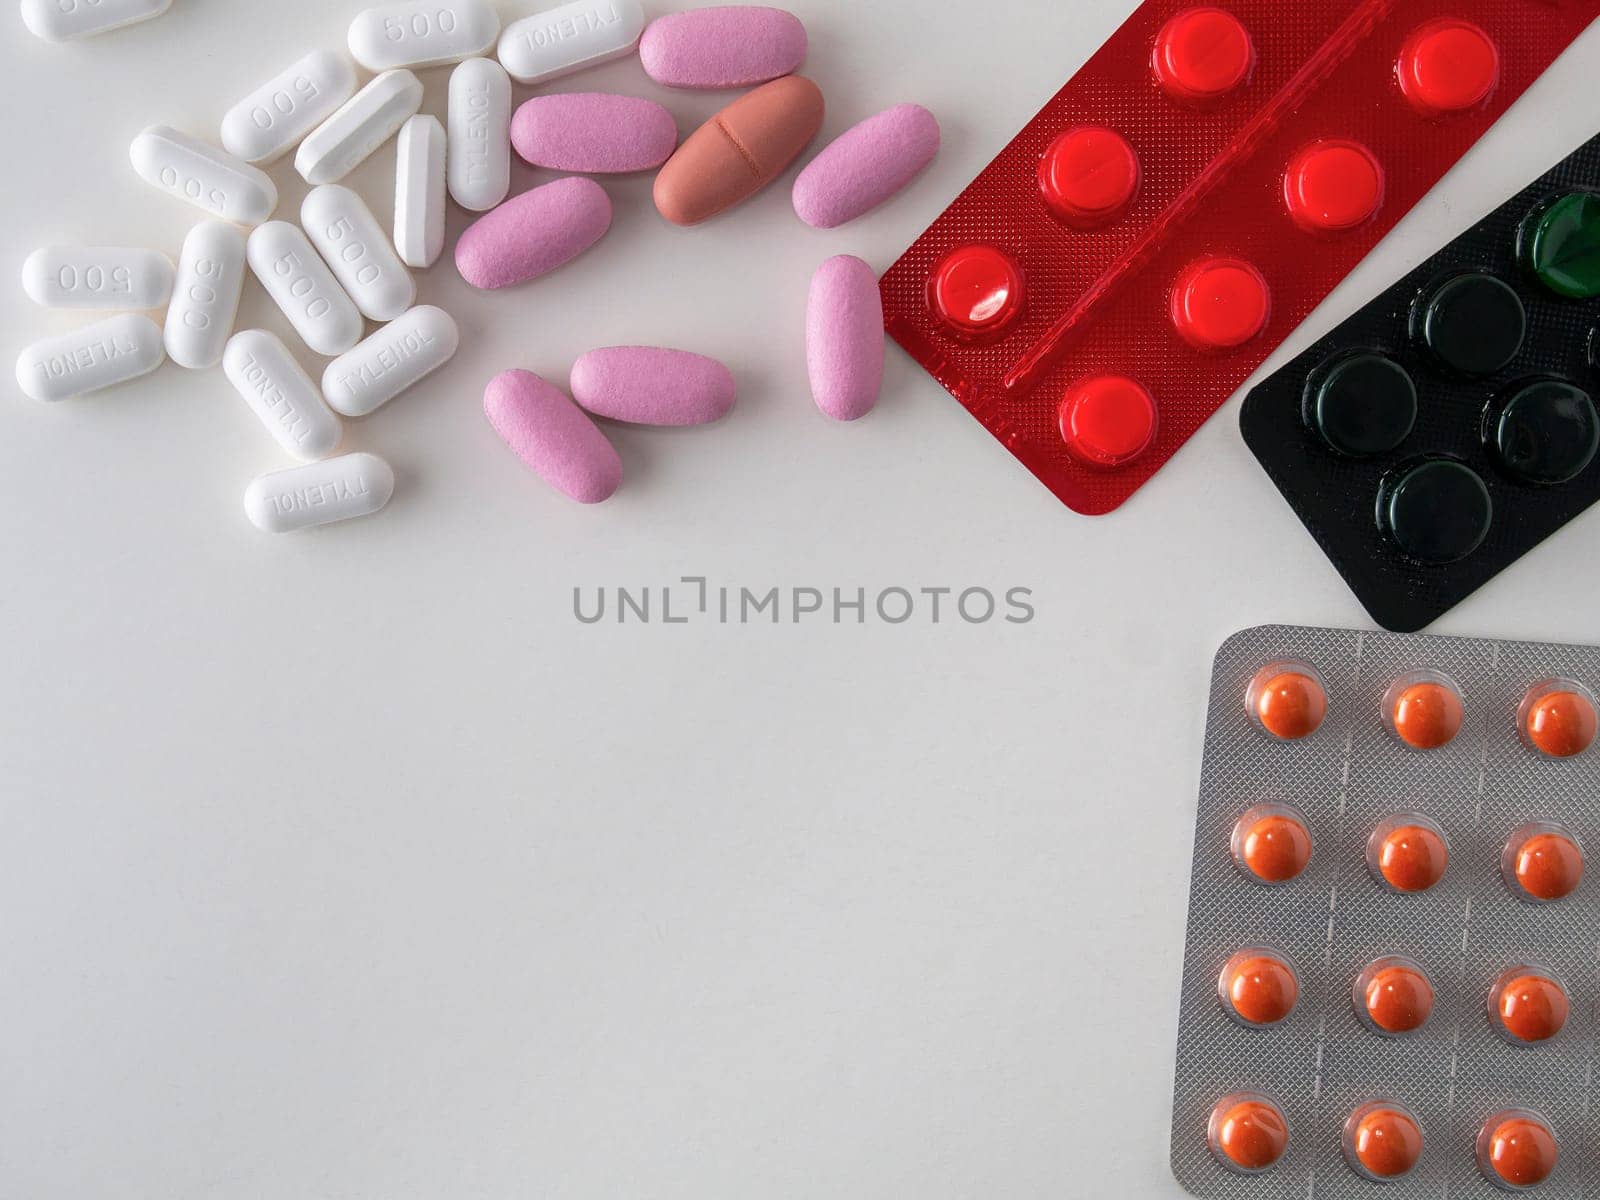 multicolored medical pills and packs of pills on a white table.